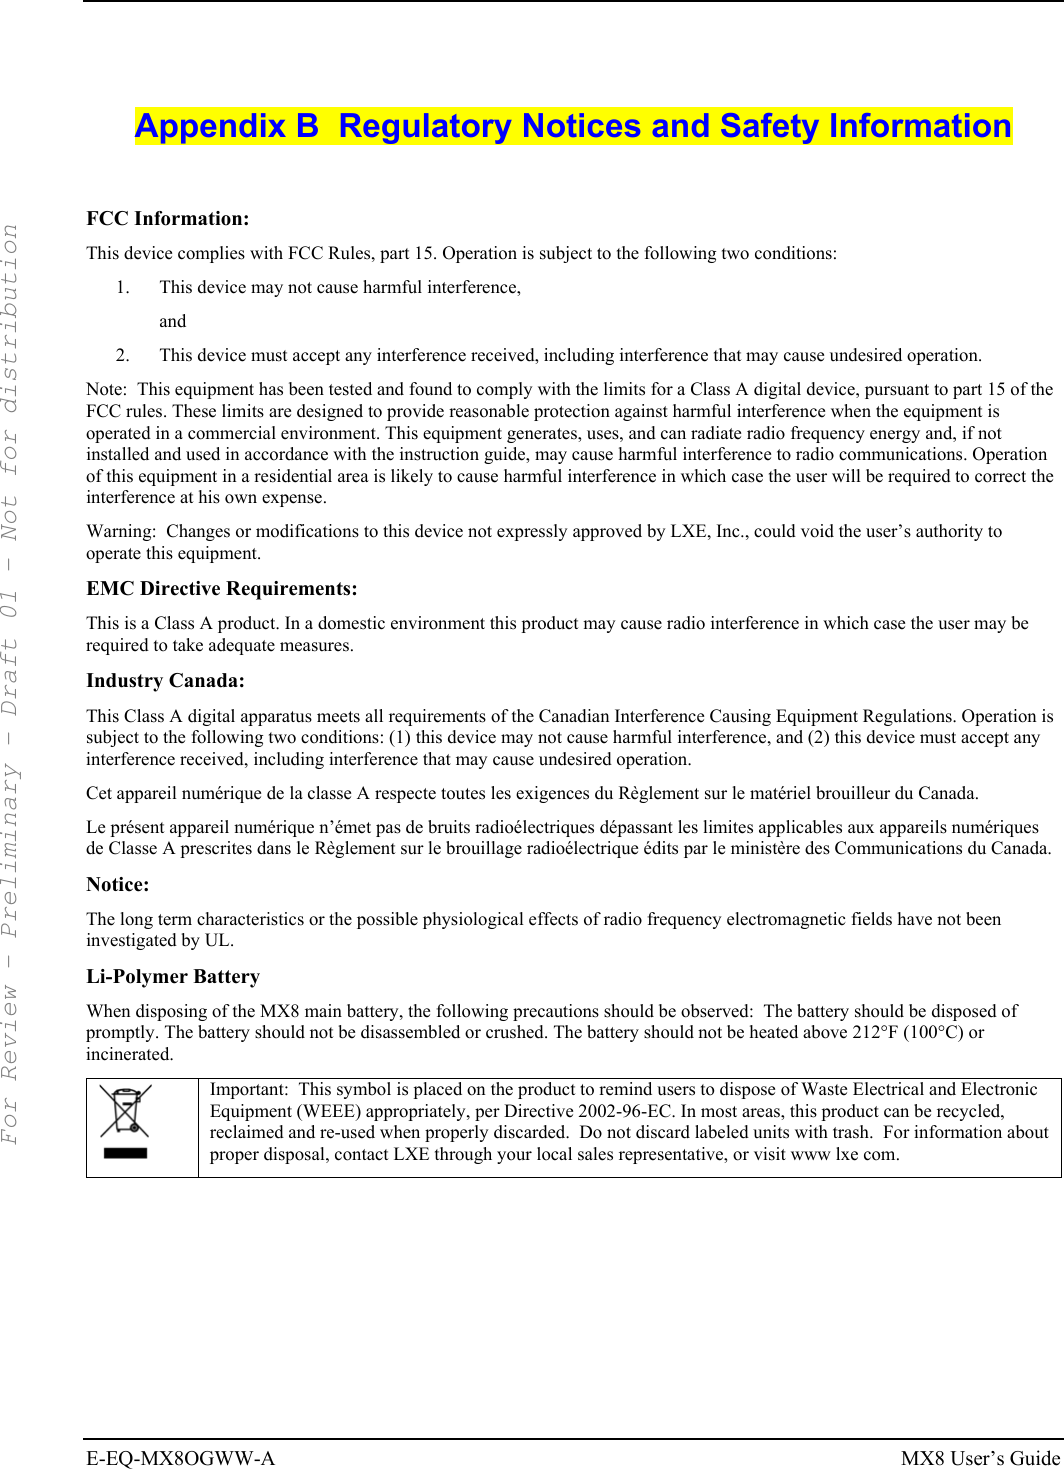  E-EQ-MX8OGWW-A MX8 User’s Guide  Appendix B  Regulatory Notices and Safety Information  FCC Information: This device complies with FCC Rules, part 15. Operation is subject to the following two conditions: 1.  This device may not cause harmful interference,  and 2.  This device must accept any interference received, including interference that may cause undesired operation. Note:  This equipment has been tested and found to comply with the limits for a Class A digital device, pursuant to part 15 of the FCC rules. These limits are designed to provide reasonable protection against harmful interference when the equipment is operated in a commercial environment. This equipment generates, uses, and can radiate radio frequency energy and, if not installed and used in accordance with the instruction guide, may cause harmful interference to radio communications. Operation of this equipment in a residential area is likely to cause harmful interference in which case the user will be required to correct the interference at his own expense. Warning:  Changes or modifications to this device not expressly approved by LXE, Inc., could void the user’s authority to operate this equipment. EMC Directive Requirements: This is a Class A product. In a domestic environment this product may cause radio interference in which case the user may be required to take adequate measures. Industry Canada: This Class A digital apparatus meets all requirements of the Canadian Interference Causing Equipment Regulations. Operation is subject to the following two conditions: (1) this device may not cause harmful interference, and (2) this device must accept any interference received, including interference that may cause undesired operation. Cet appareil numérique de la classe A respecte toutes les exigences du Règlement sur le matériel brouilleur du Canada. Le présent appareil numérique n’émet pas de bruits radioélectriques dépassant les limites applicables aux appareils numériques de Classe A prescrites dans le Règlement sur le brouillage radioélectrique édits par le ministère des Communications du Canada. Notice: The long term characteristics or the possible physiological effects of radio frequency electromagnetic fields have not been investigated by UL. Li-Polymer Battery When disposing of the MX8 main battery, the following precautions should be observed:  The battery should be disposed of promptly. The battery should not be disassembled or crushed. The battery should not be heated above 212°F (100°C) or incinerated.  Important:  This symbol is placed on the product to remind users to dispose of Waste Electrical and Electronic Equipment (WEEE) appropriately, per Directive 2002-96-EC. In most areas, this product can be recycled, reclaimed and re-used when properly discarded.  Do not discard labeled units with trash.  For information about proper disposal, contact LXE through your local sales representative, or visit www lxe com.  For Review - Preliminary - Draft 01 - Not for distribution 